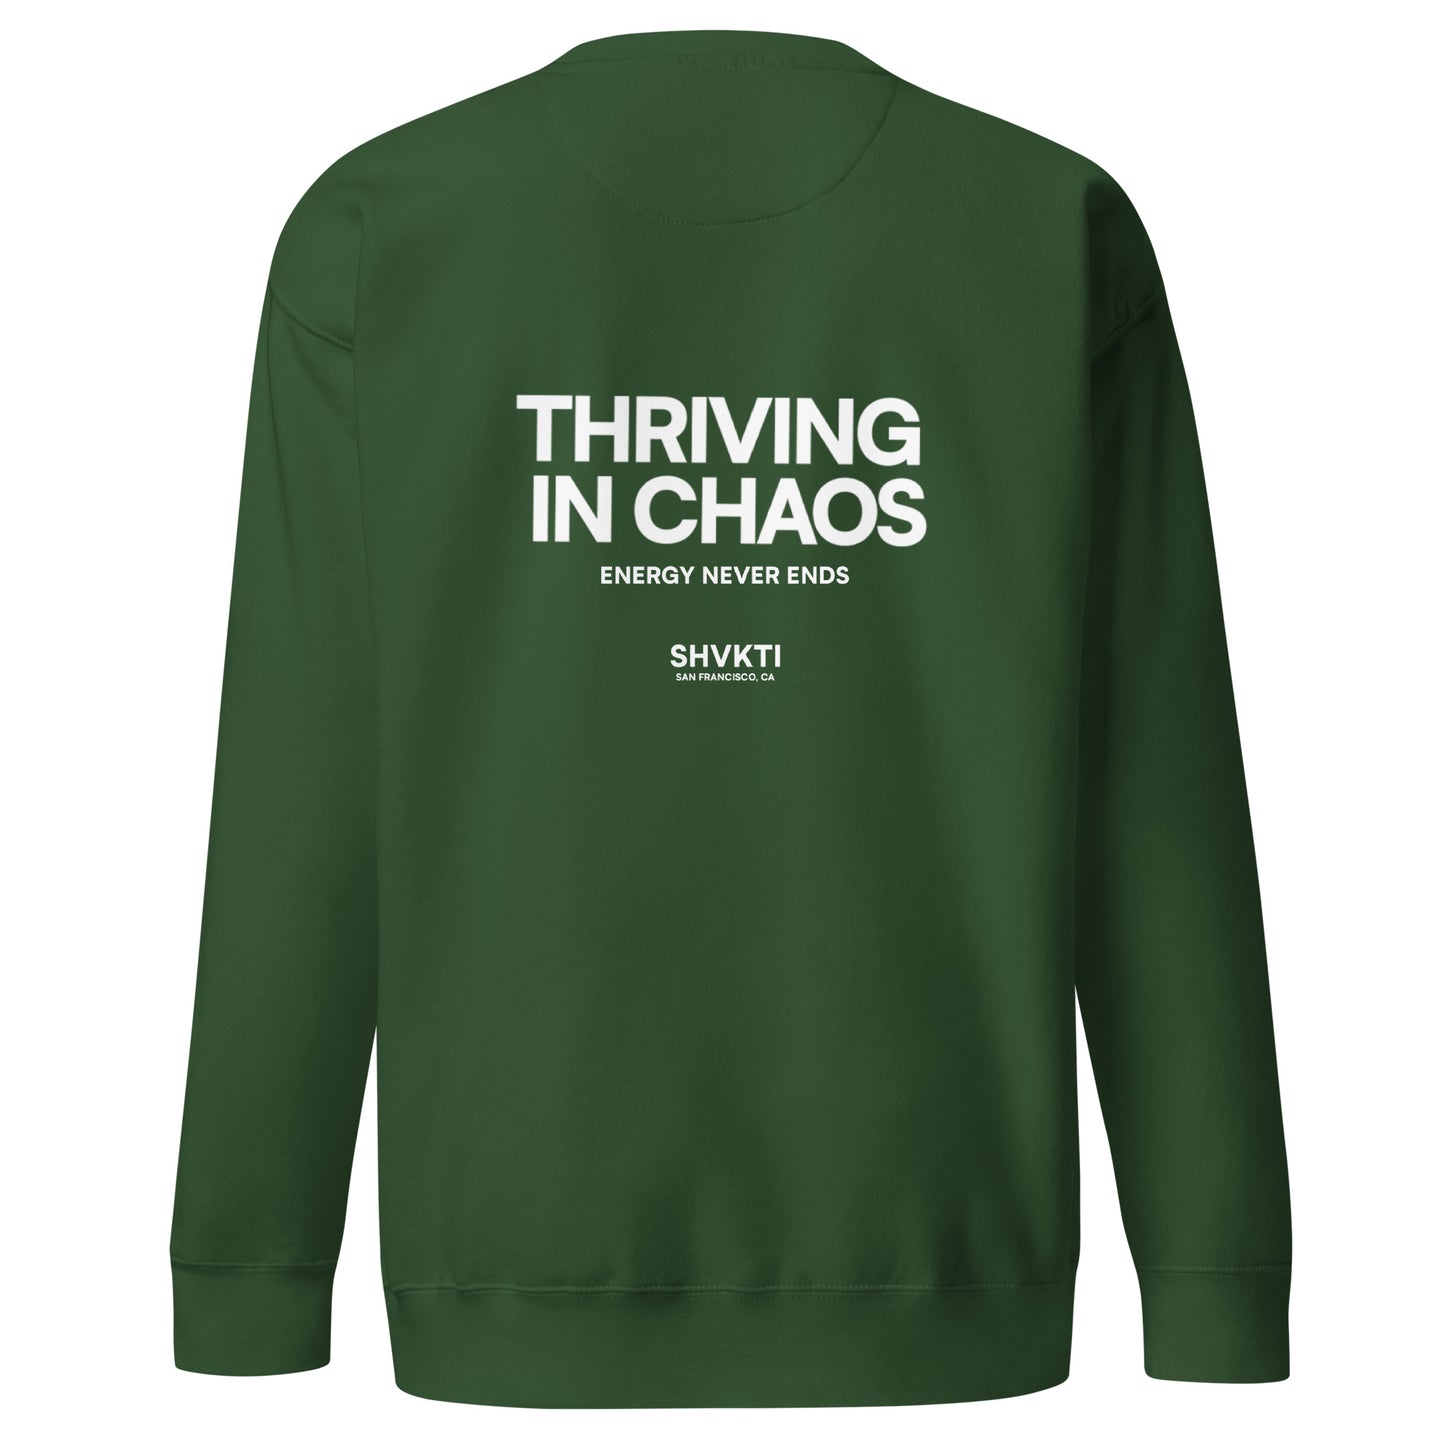 THRIVING IN CHAOS - SWEATER (FOREST GREEN)